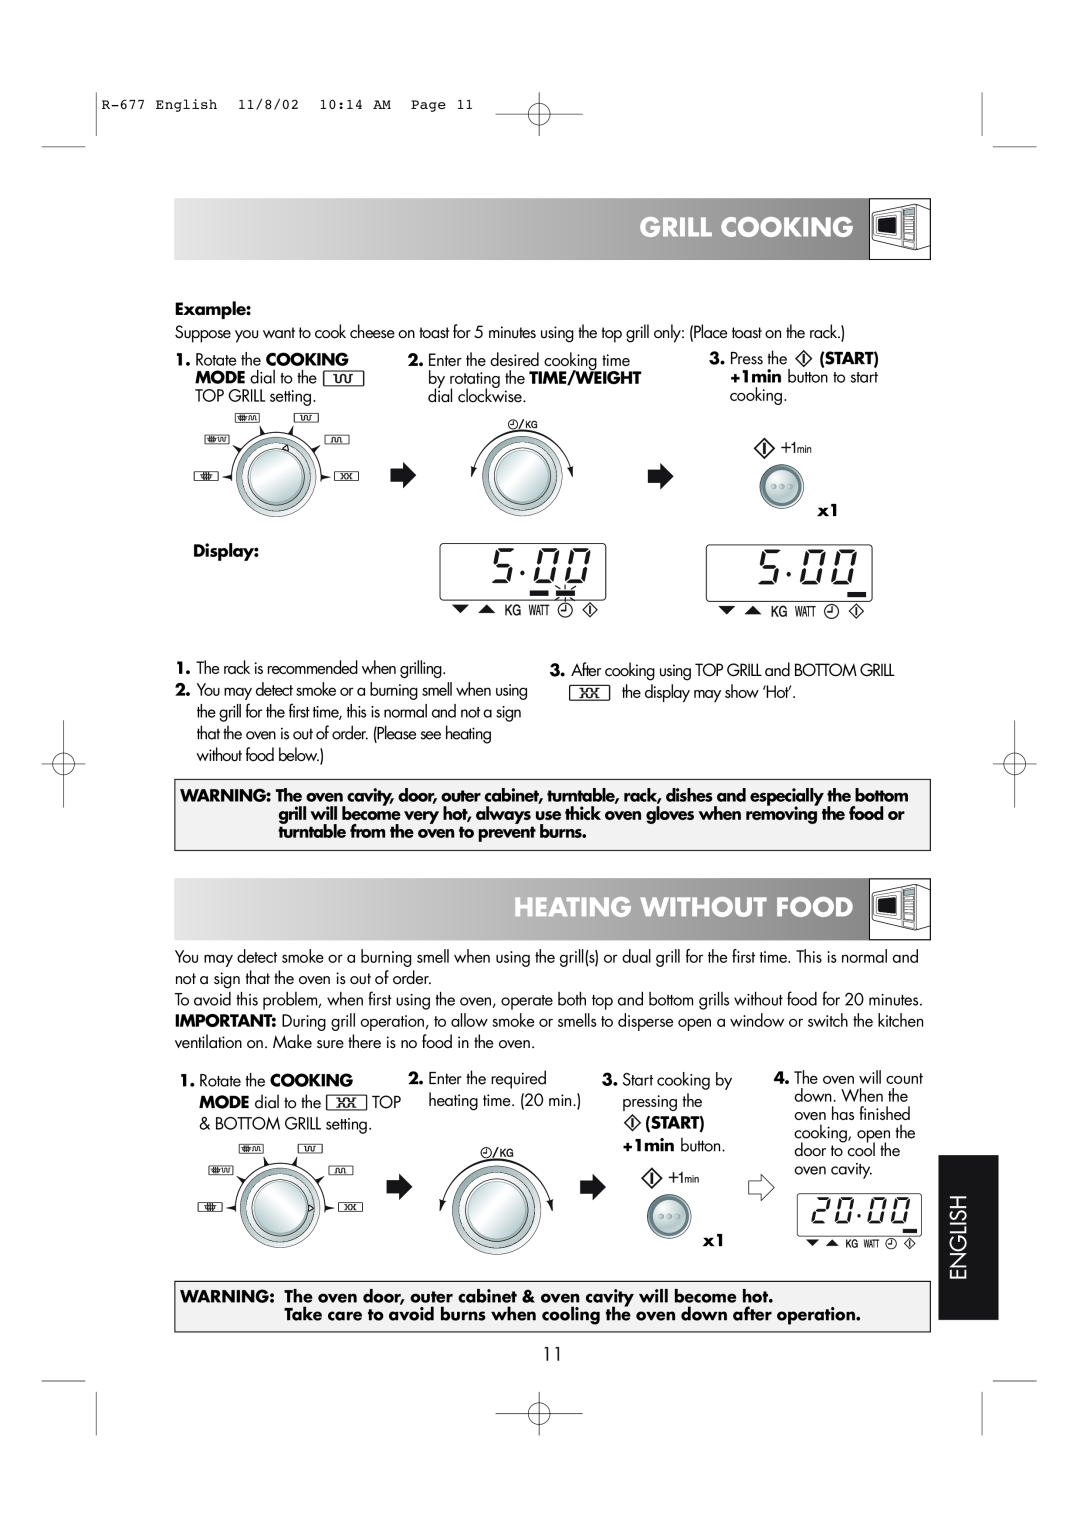 Sharp R-677F operation manual Heating Without Food, Grill Cooking, English, x1 Display, Start 